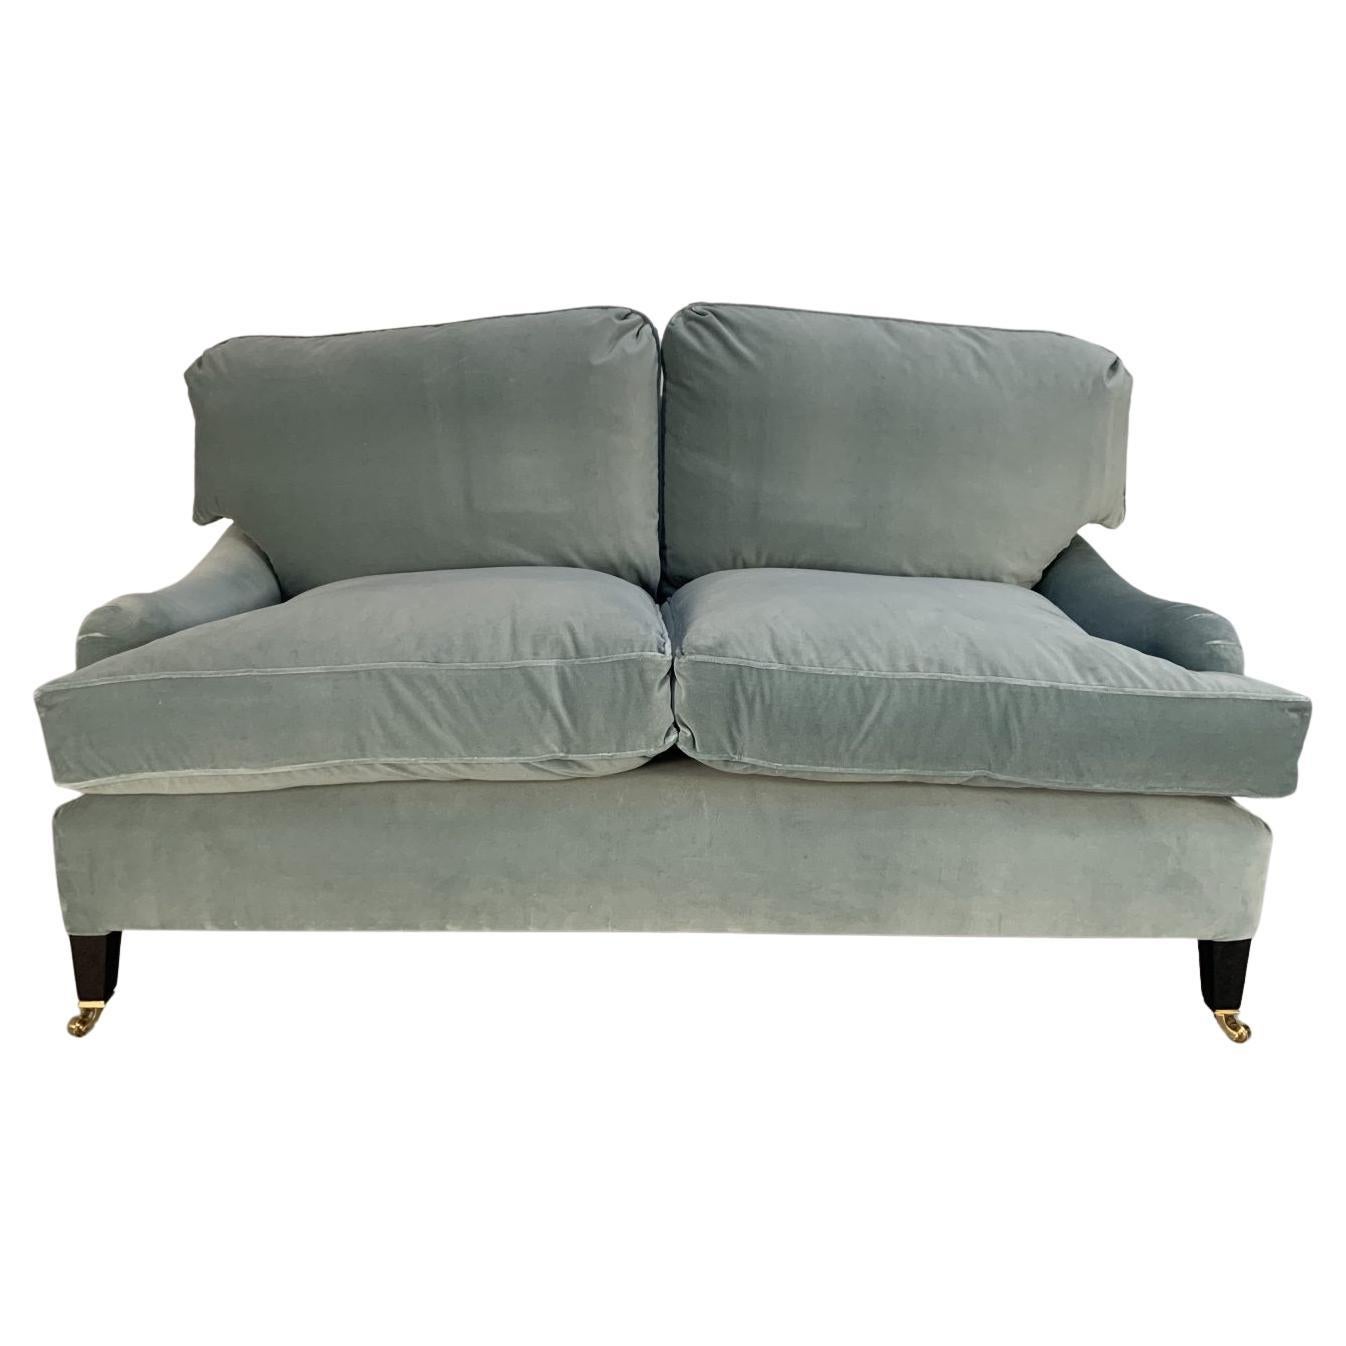 George Smith “Signature” Sofa, Small 2-Seat, in Pale Blue Italian Velvet For Sale